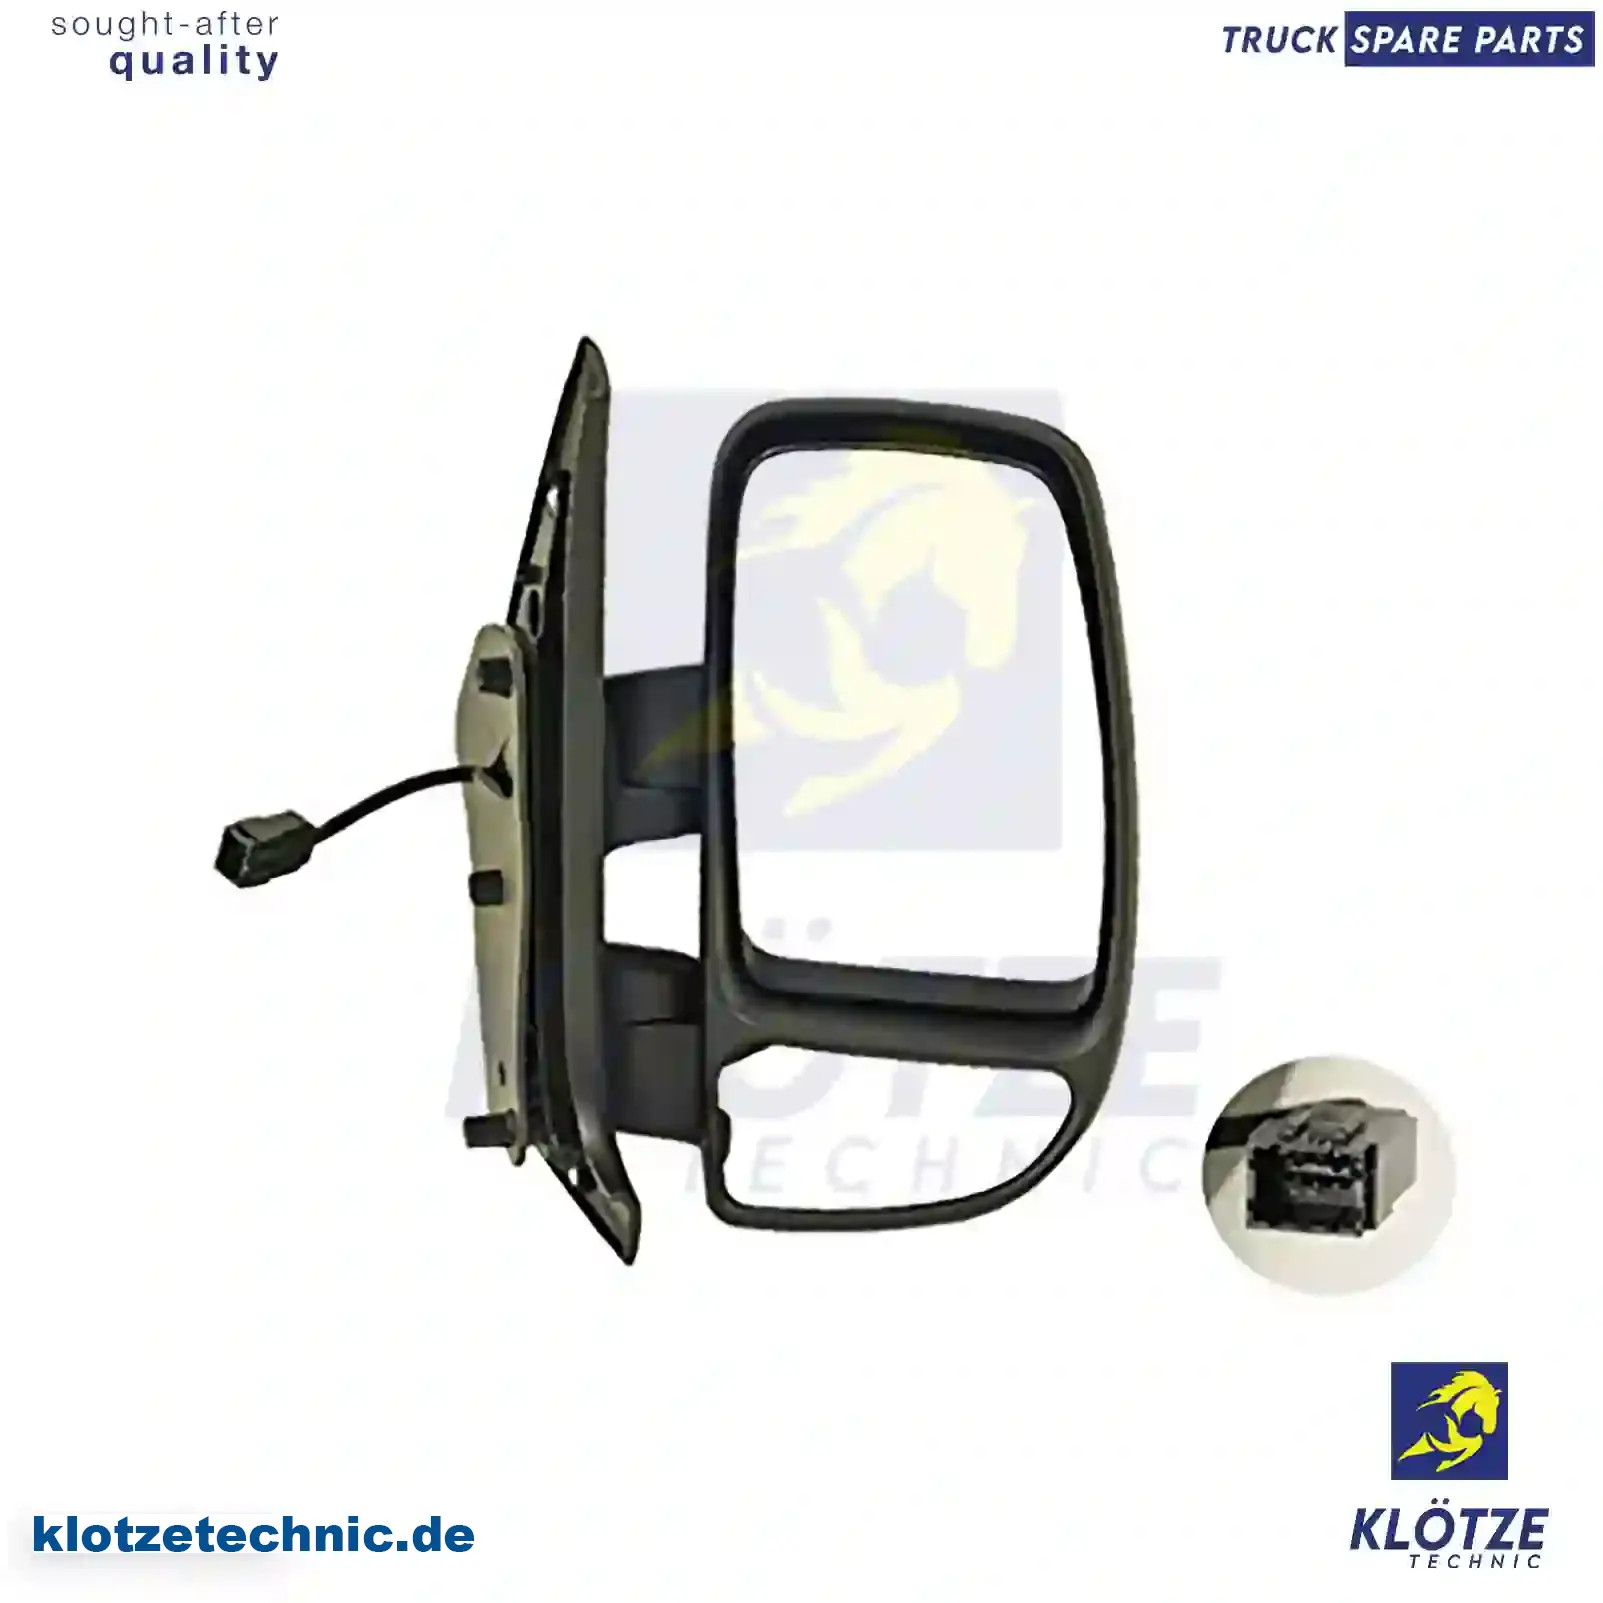 Main mirror, complete, right, heated, electrical, 96301-00QAT, 7700352188, 8200270544